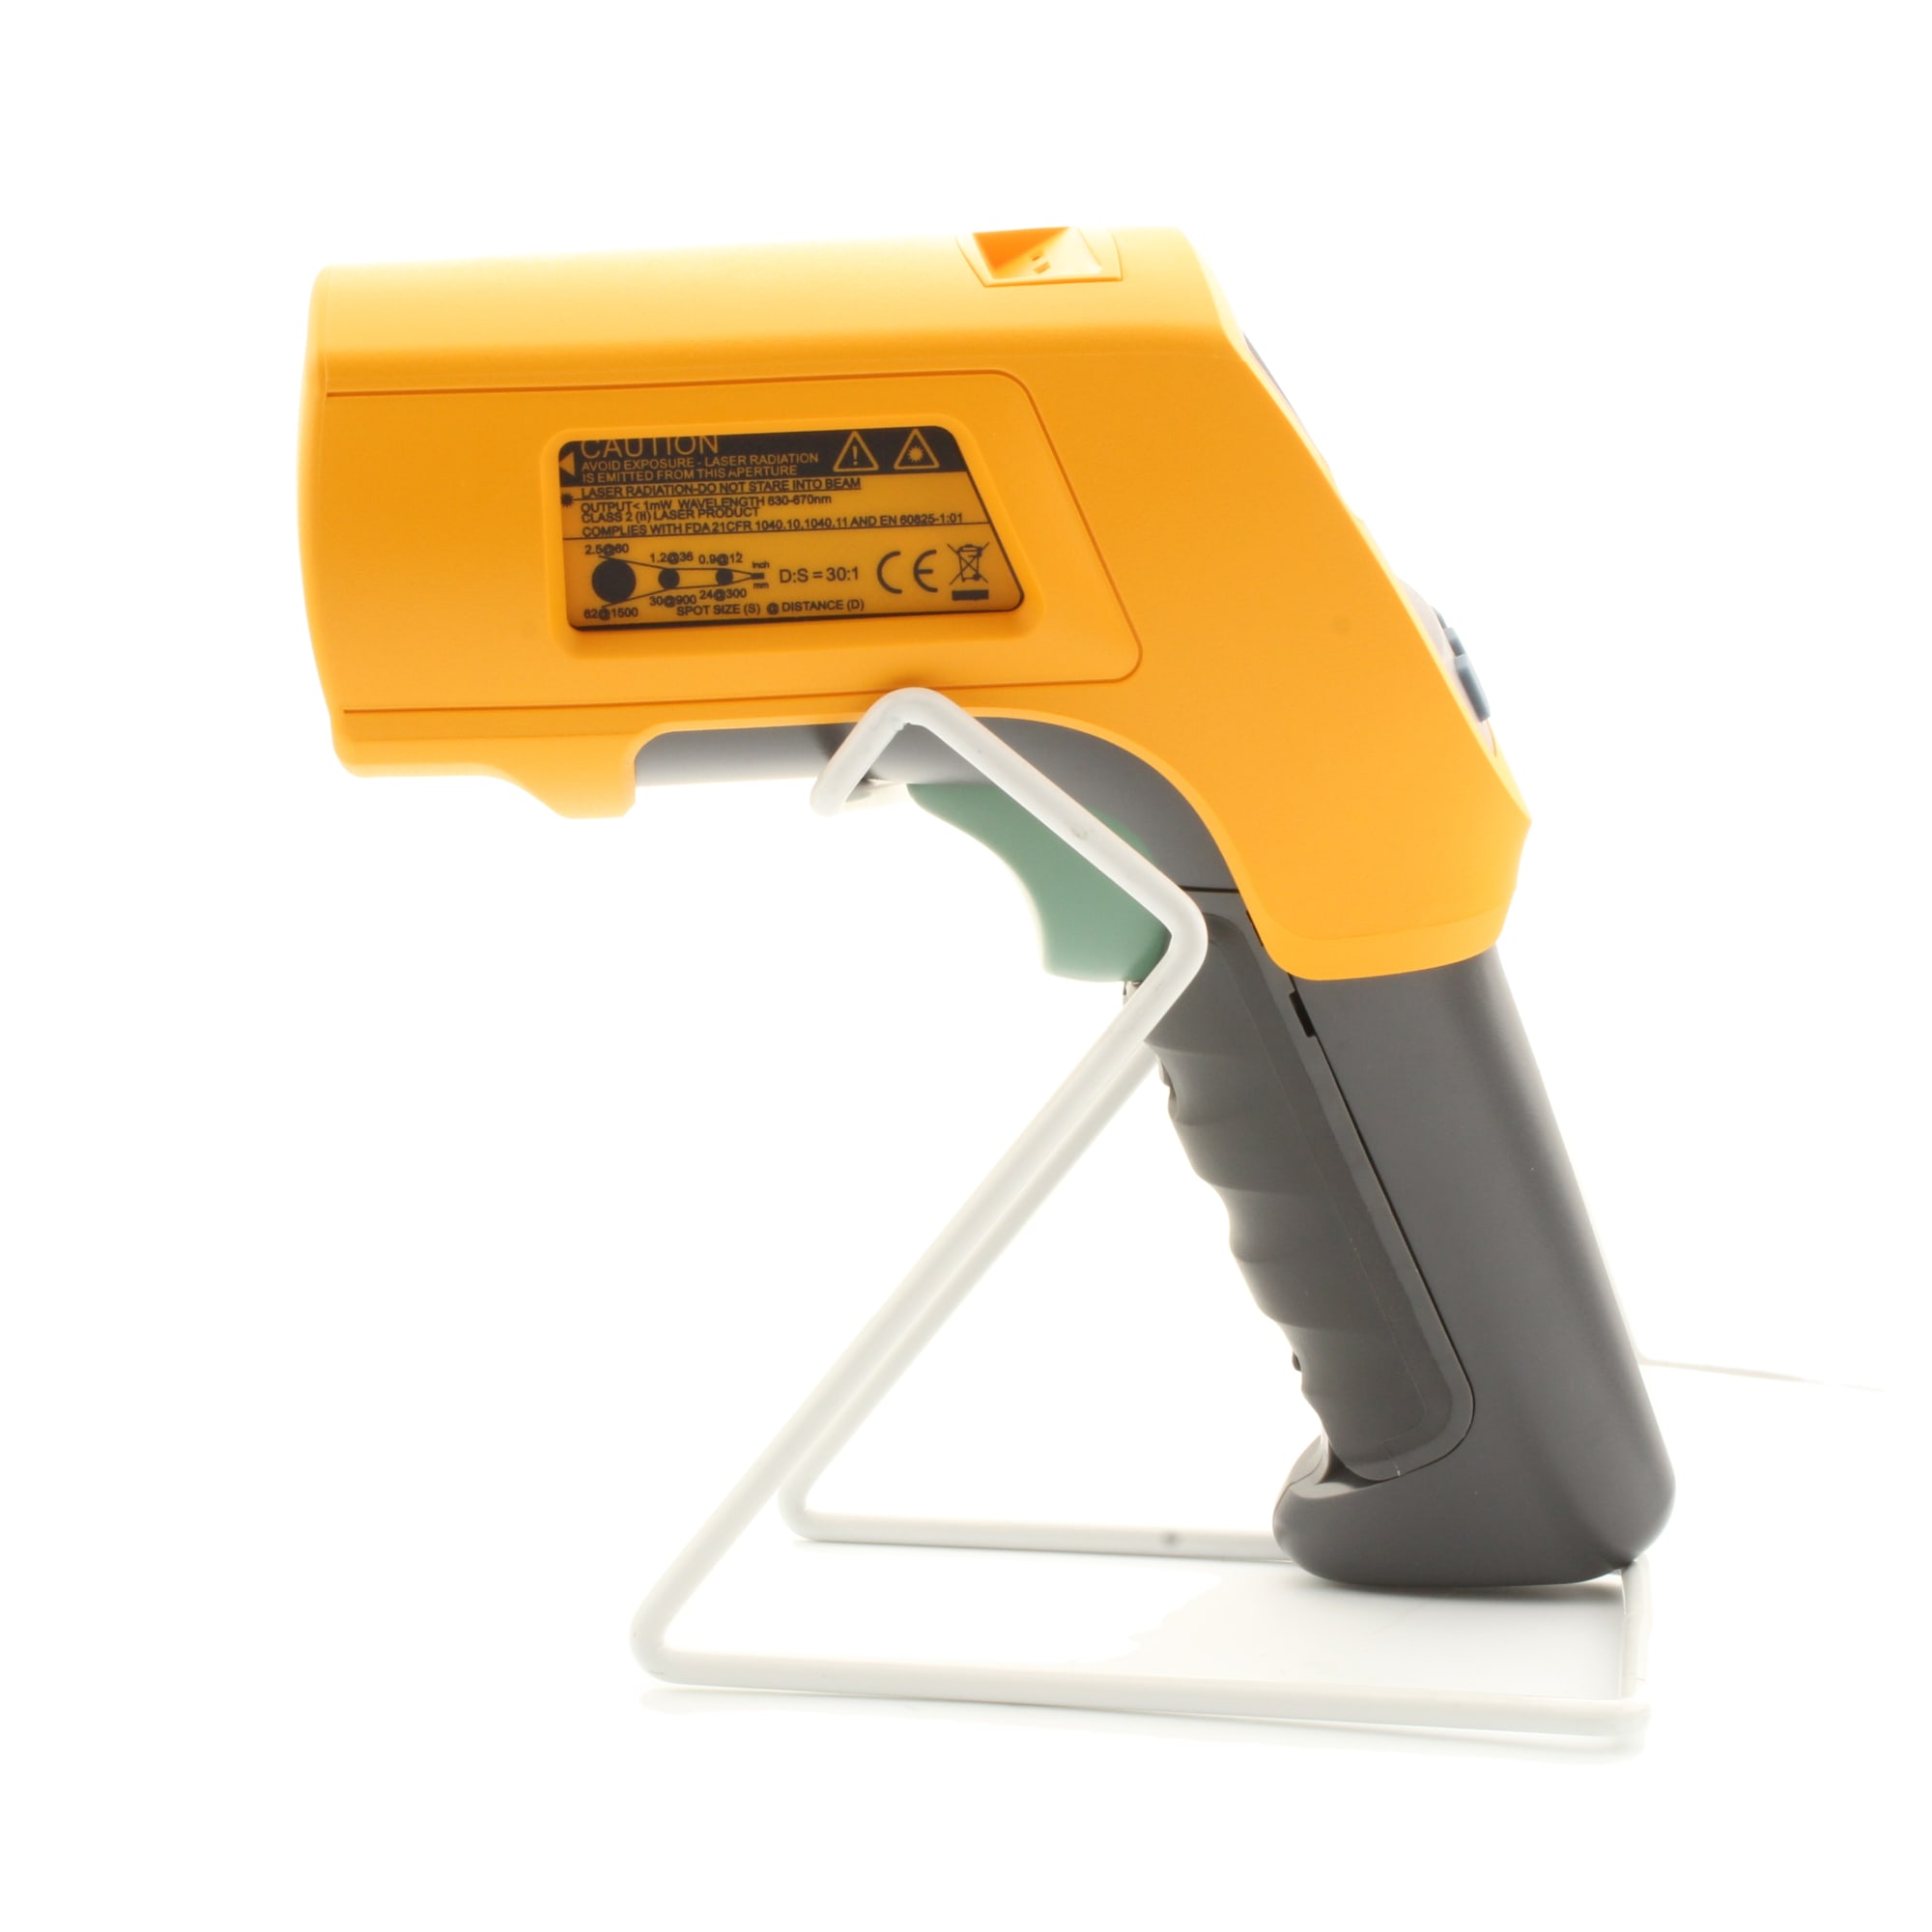 FLUKE Fluke Amber infrared thermometer IR608A infrared point temperature gun  high-precision industrial thermometer